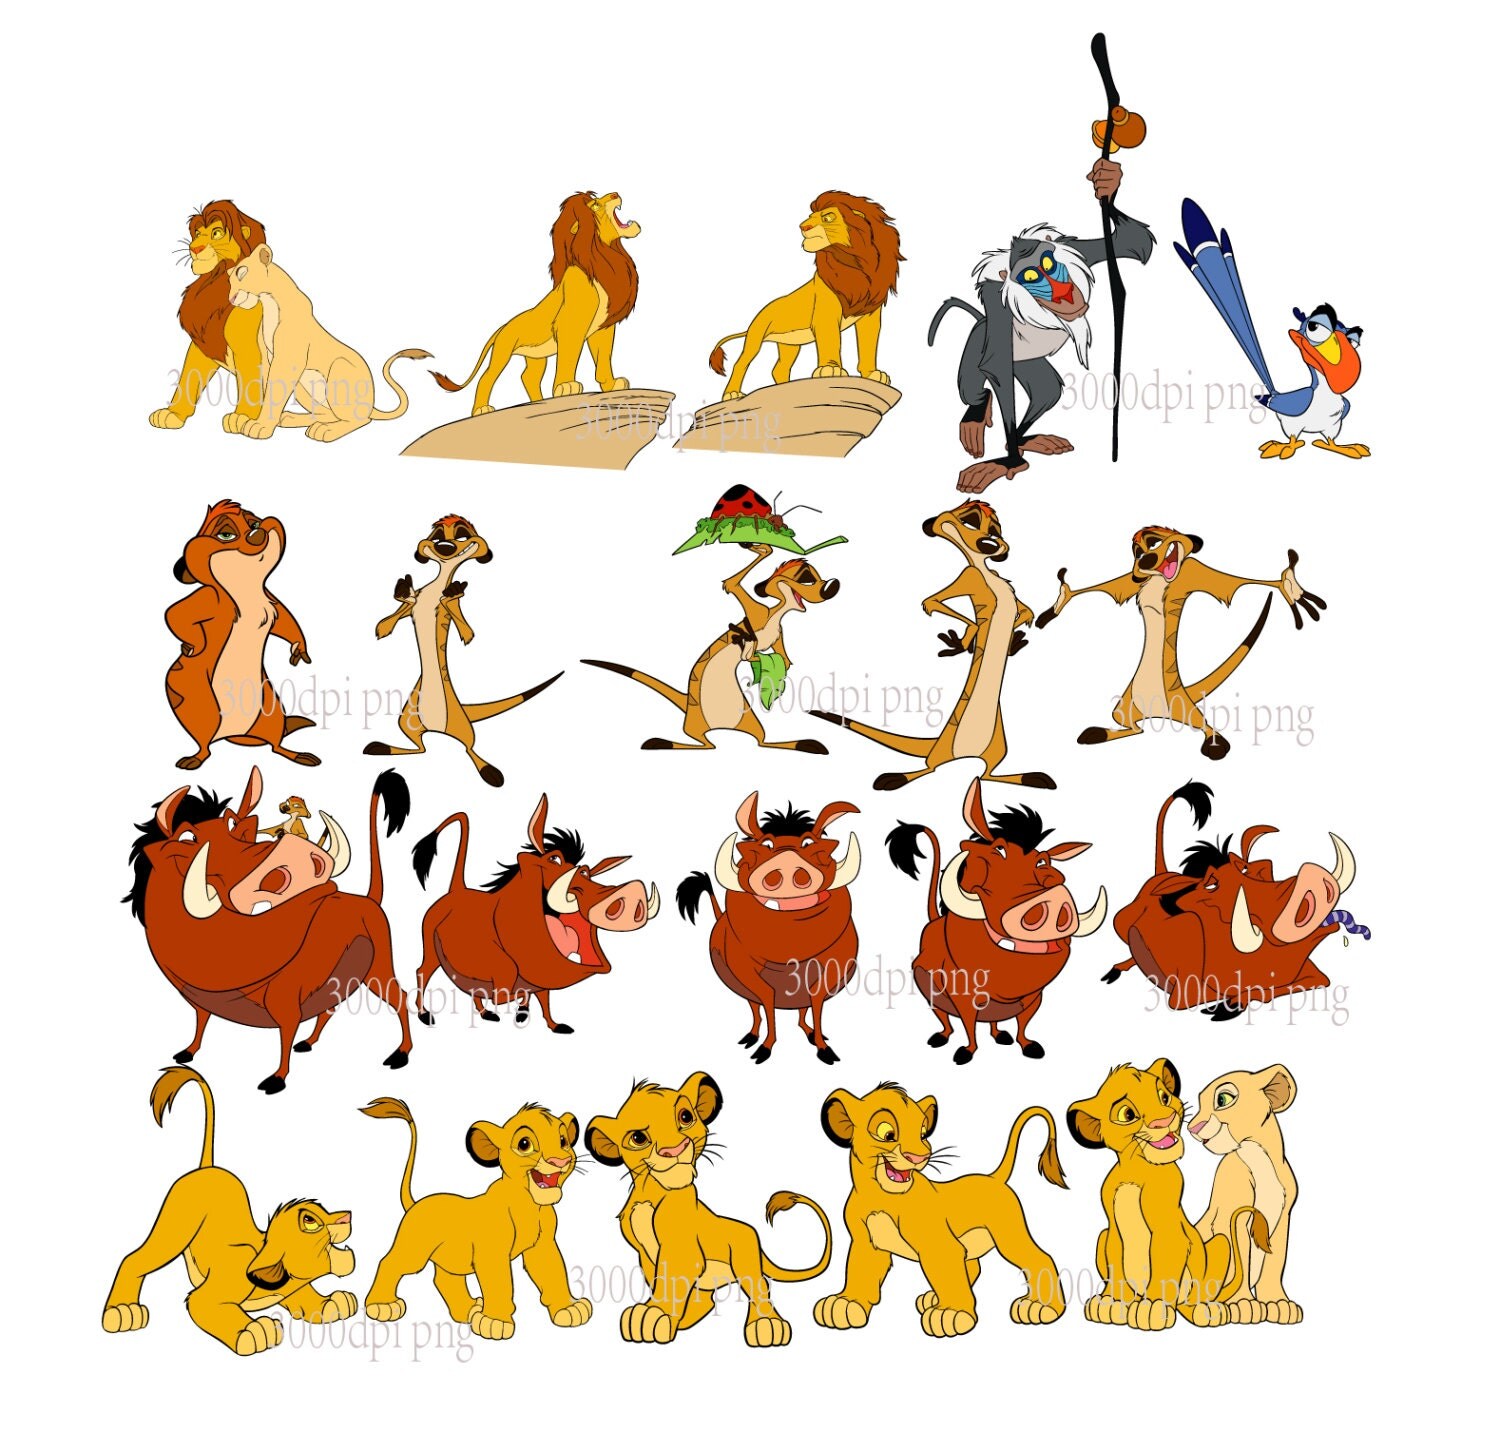 Download The Lion King digital clipart vector eps png files Clip Art